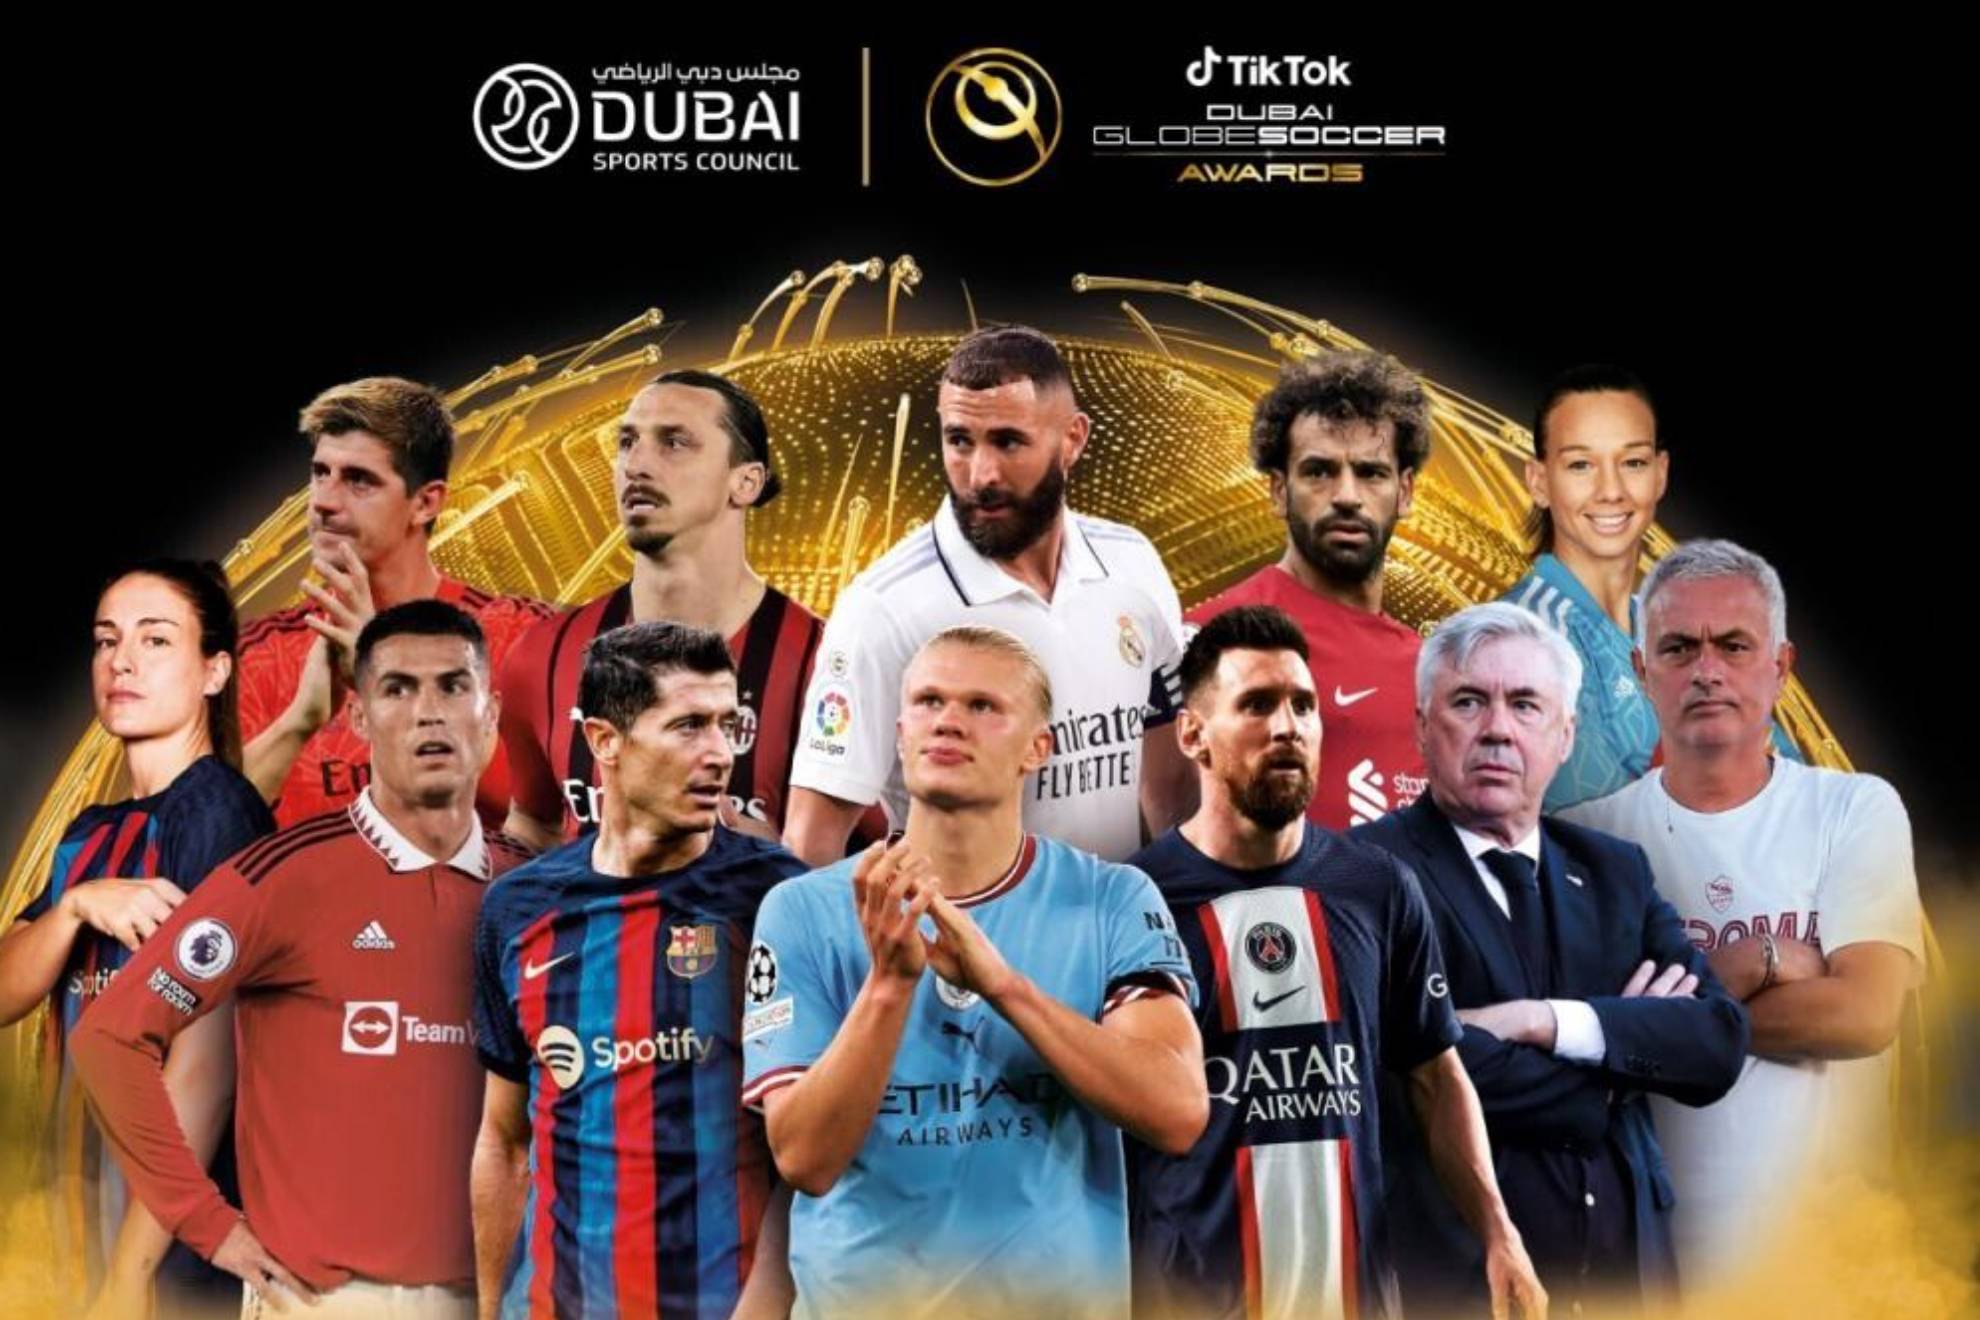 Stars will shine in Dubai three days before the World Cup in the Globe Soccer Awards